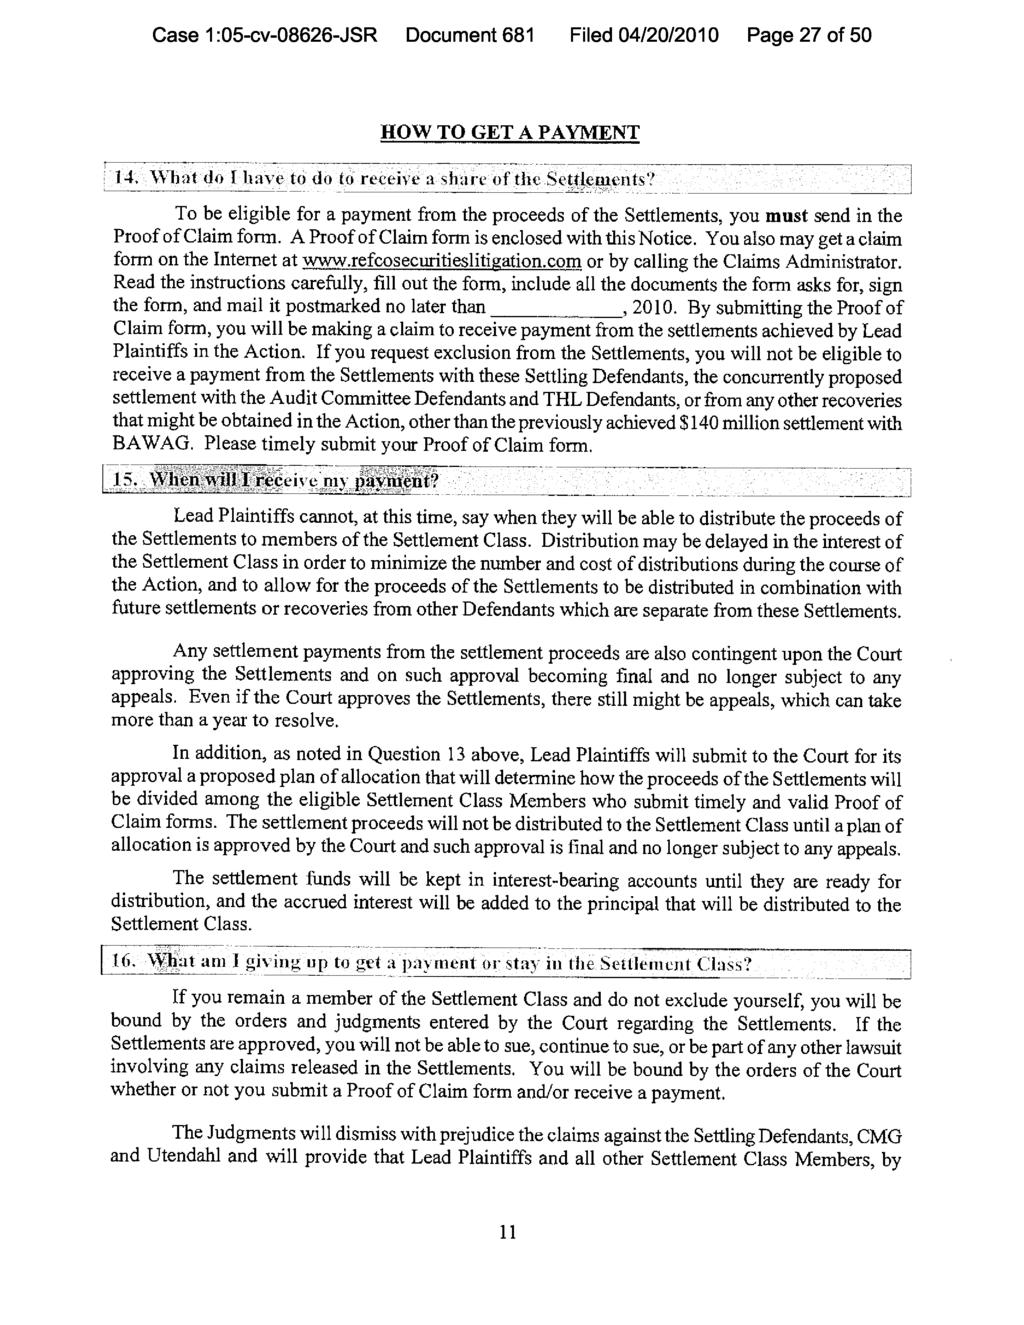 Case 1:05-cv-08626-JSR Document 681 Filed 04/20/2010 Page 27 of 50 HOW TO GET A PAYMENT ^ E. 0$ E 3 6$ 9 $.